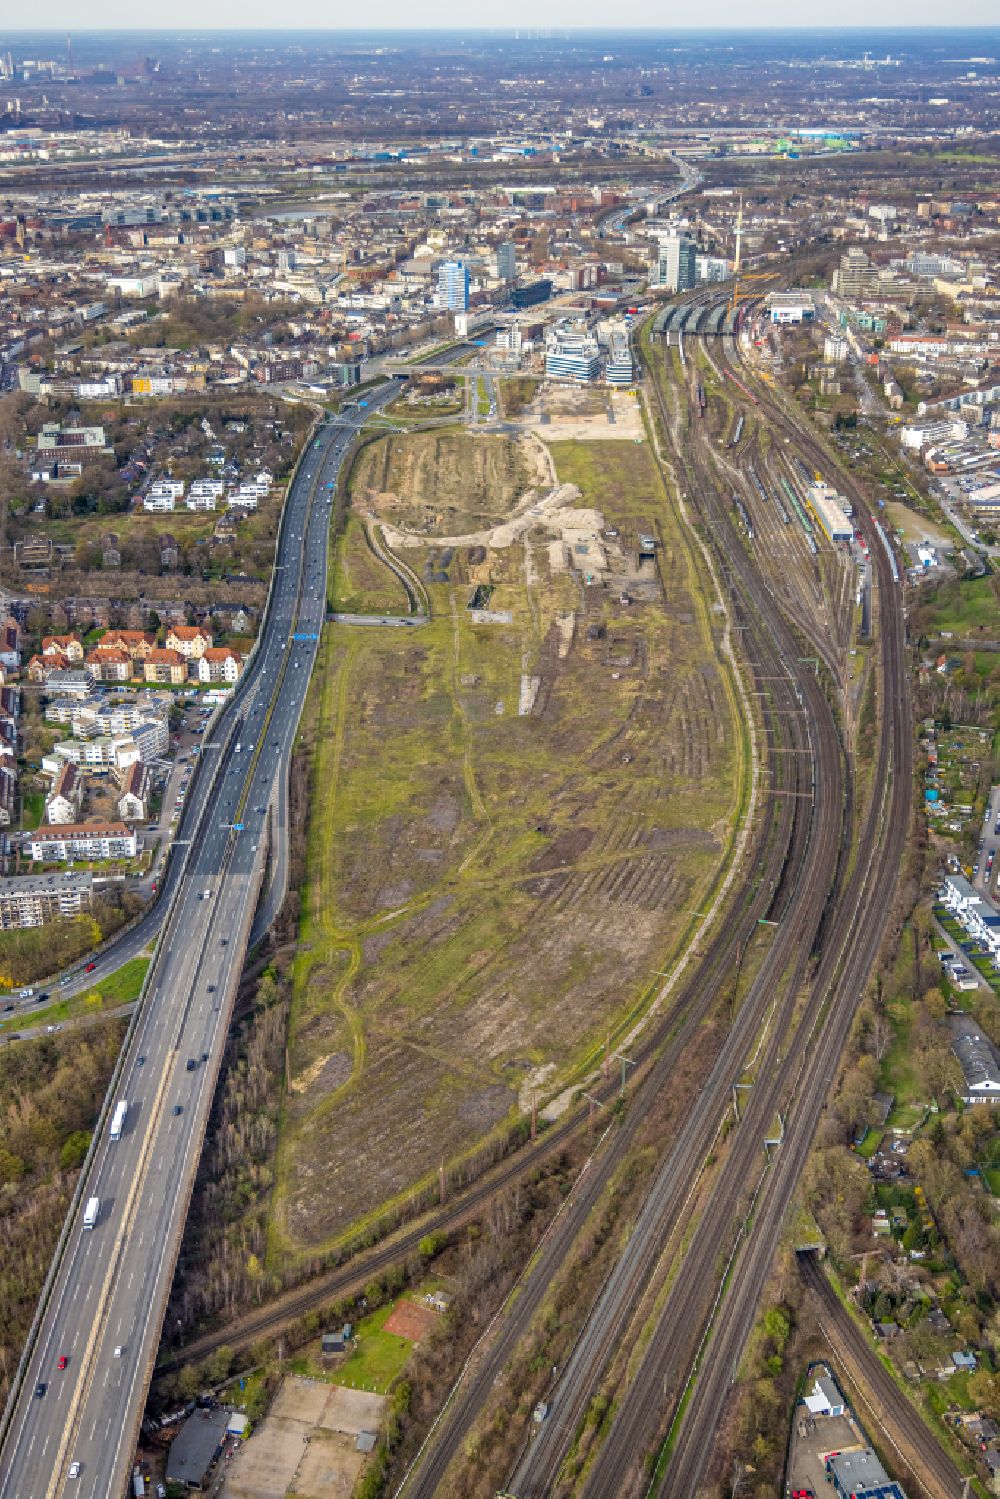 Aerial image Duisburg - Demolition and disposal work on the remains of the ruins of ehemaligen Abfertigungshalle of the former dispatch hall of the freight yard - marshalling yard for the new building project Am alten Gueterbahnhof on the former site of the Loveparade in the district Dellviertel in Duisburg at Ruhrgebiet in the state North Rhine-Westphalia, Germany